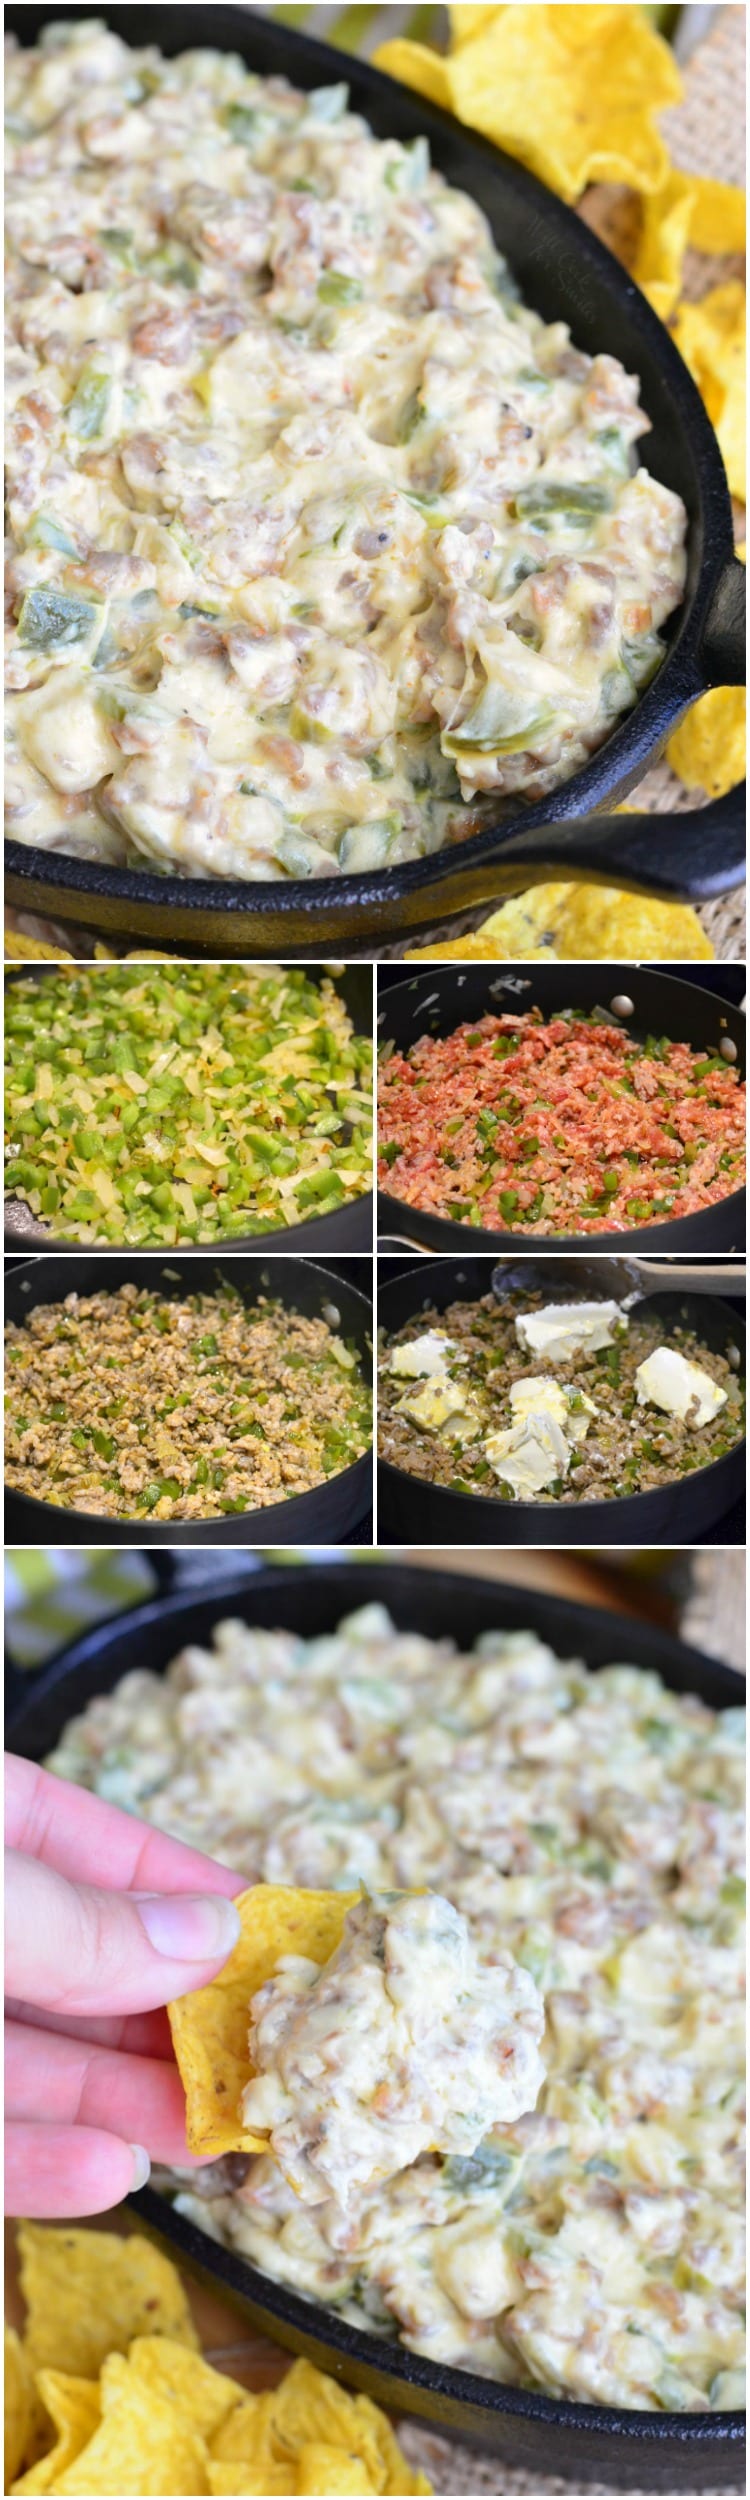 photo collage top photo Cheesy Sausage Peppers and Onions Dip in a iron skillet, middle photo collage of making the dip, bottom photo is dip in a cast iron skillet with a chip scooping some out 